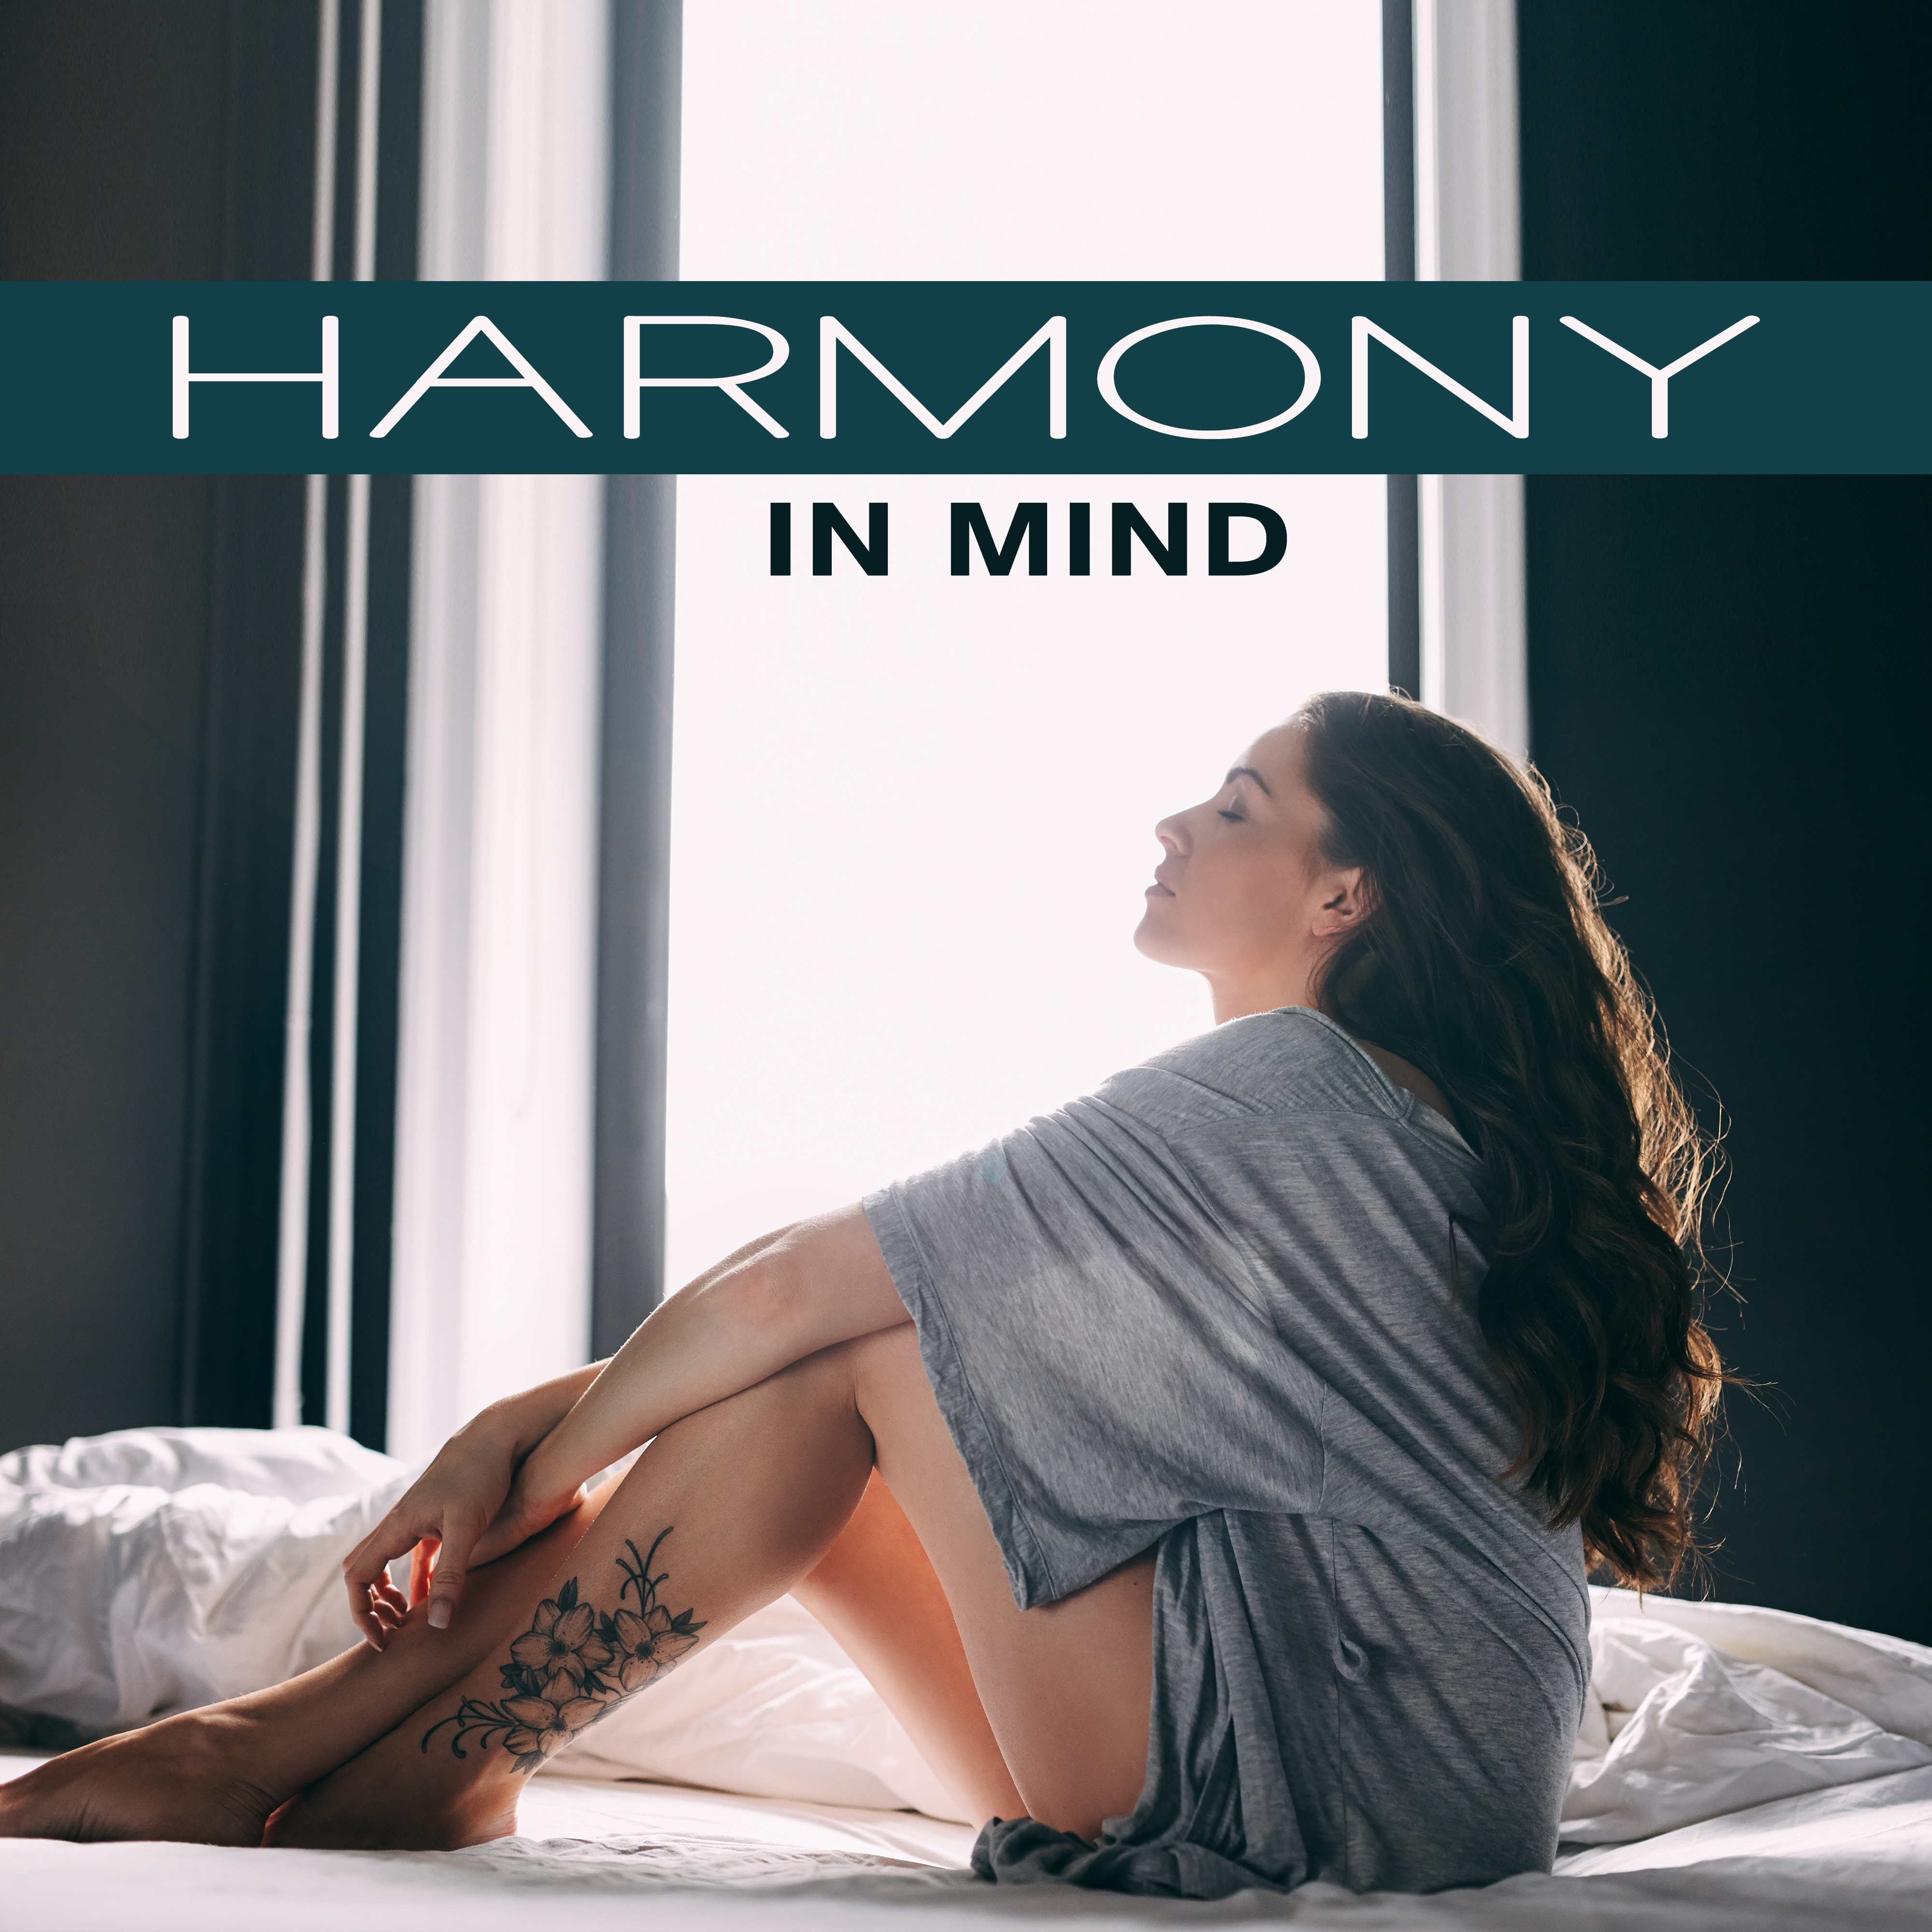 Harmony in Mind  Soft Music, Therapy Sounds, Deep Sleep, Meditation, Inner Balance, Zen, Relax, Calm Down